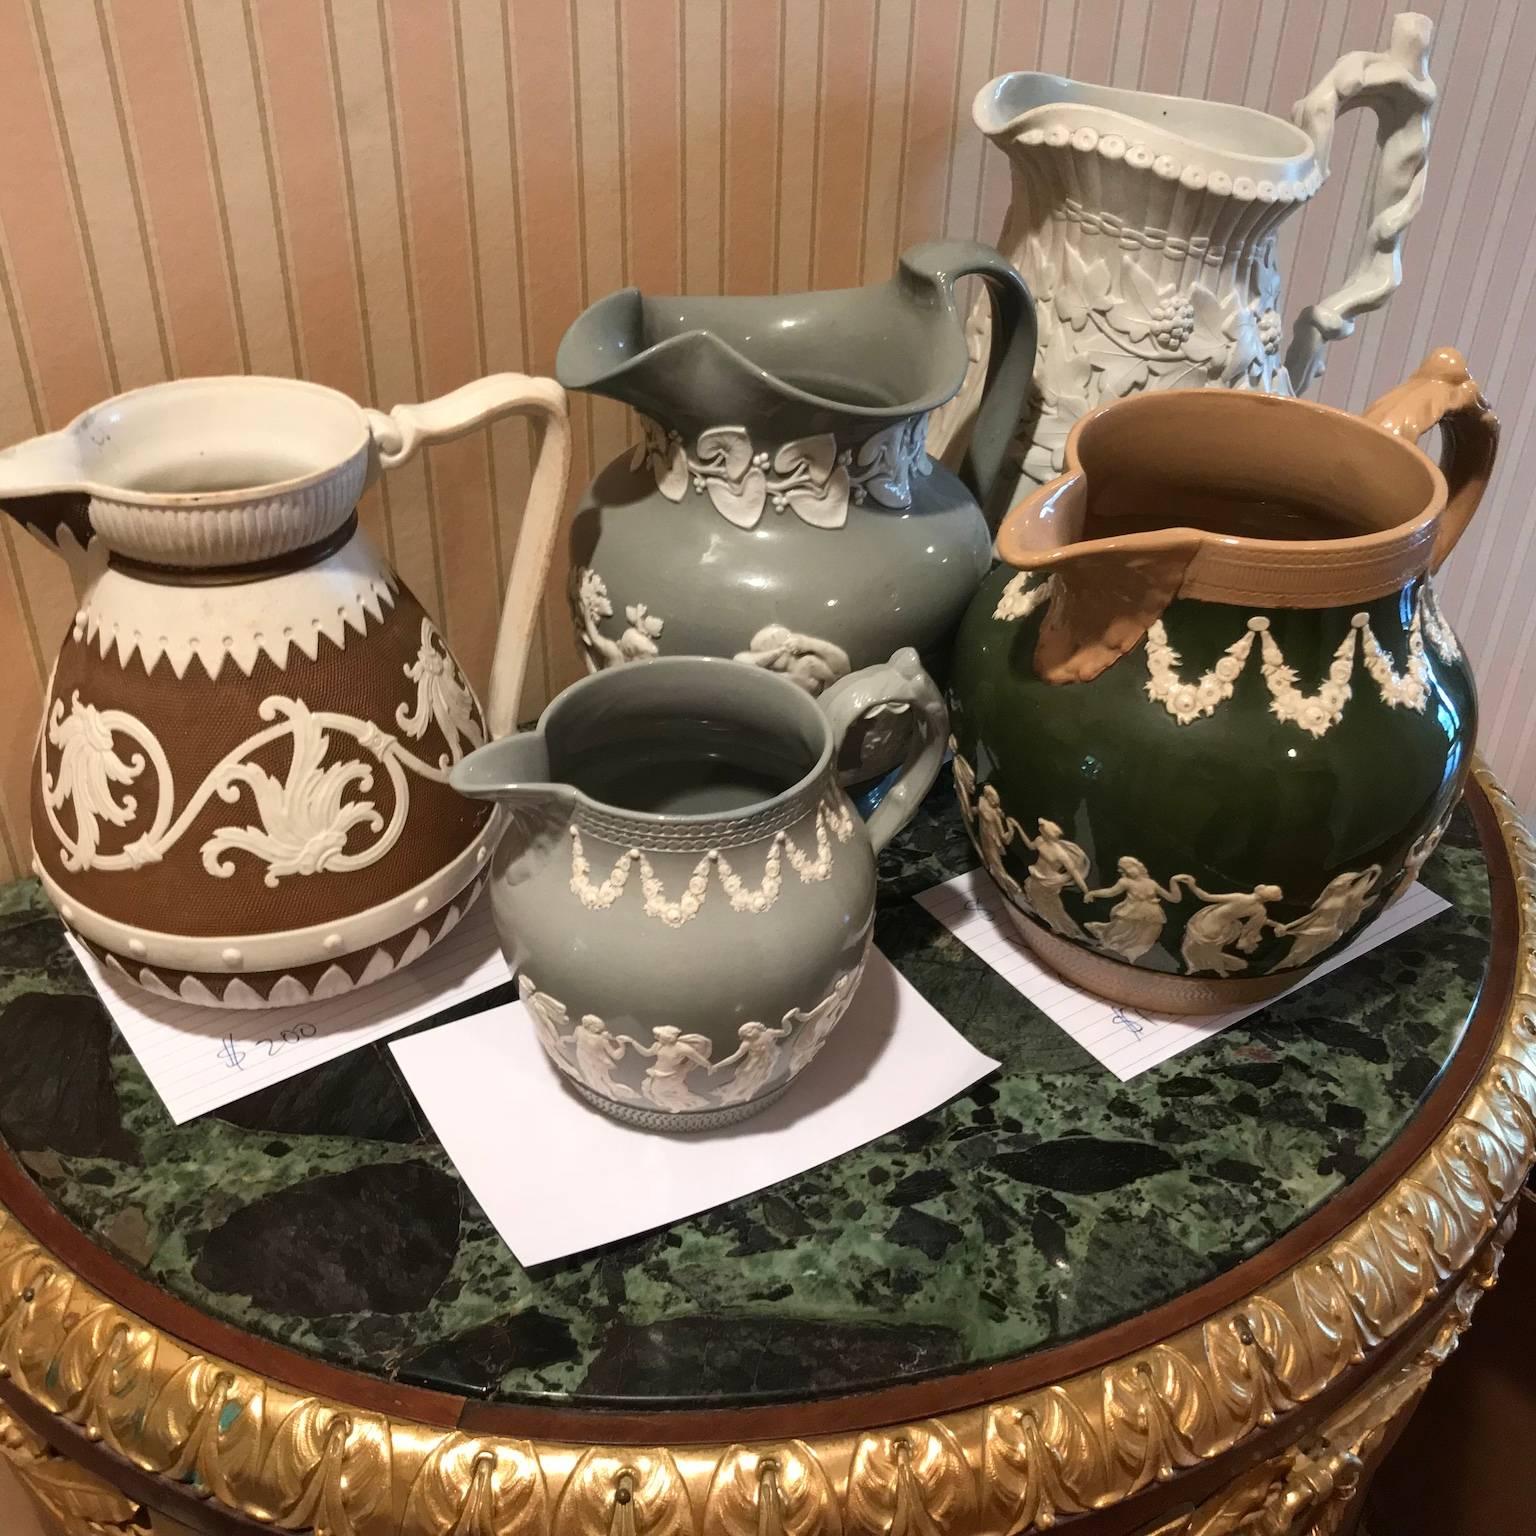 English Lot of Five Mid-19th CenturyRelief Pitchers or Jugs by Cobridge & Copelands